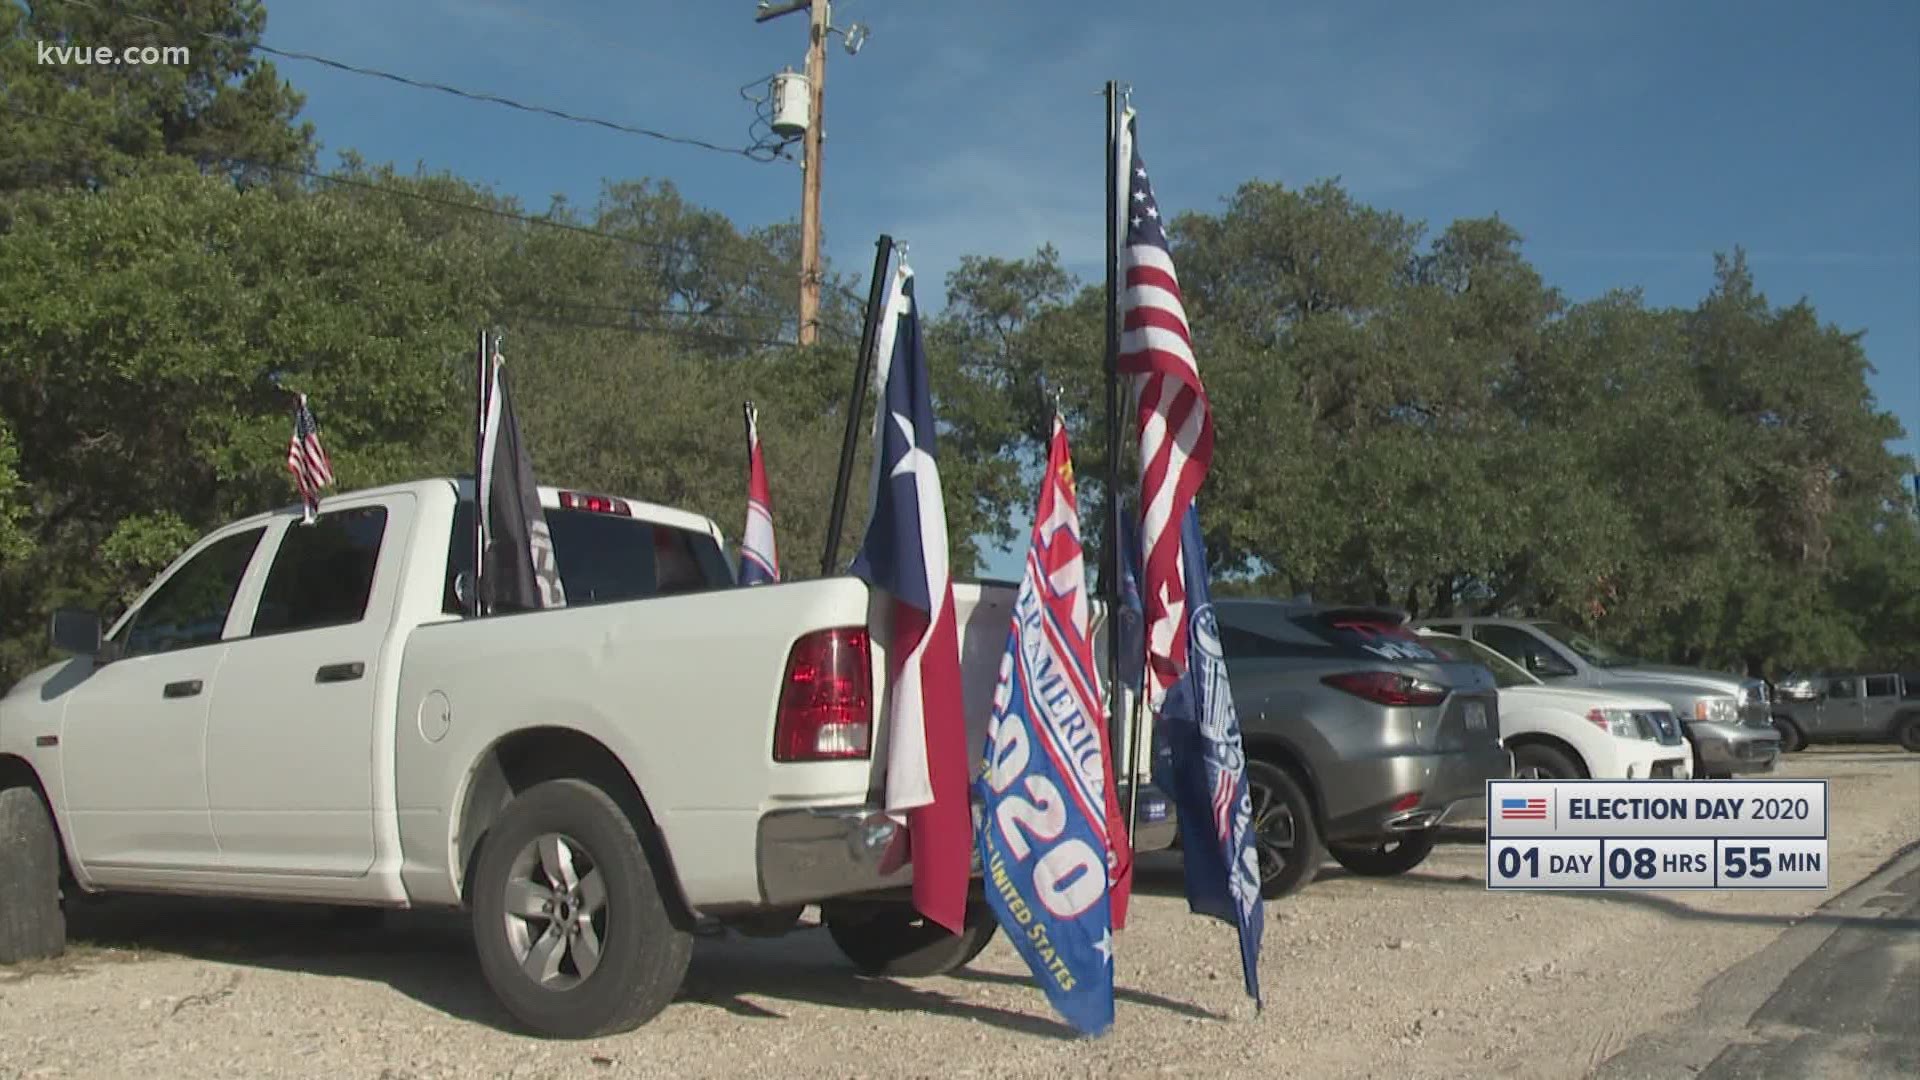 President Donald Trump's supporters gathered for a caravan near Lake Travis on Sunday. An organizer said this was a positive event.